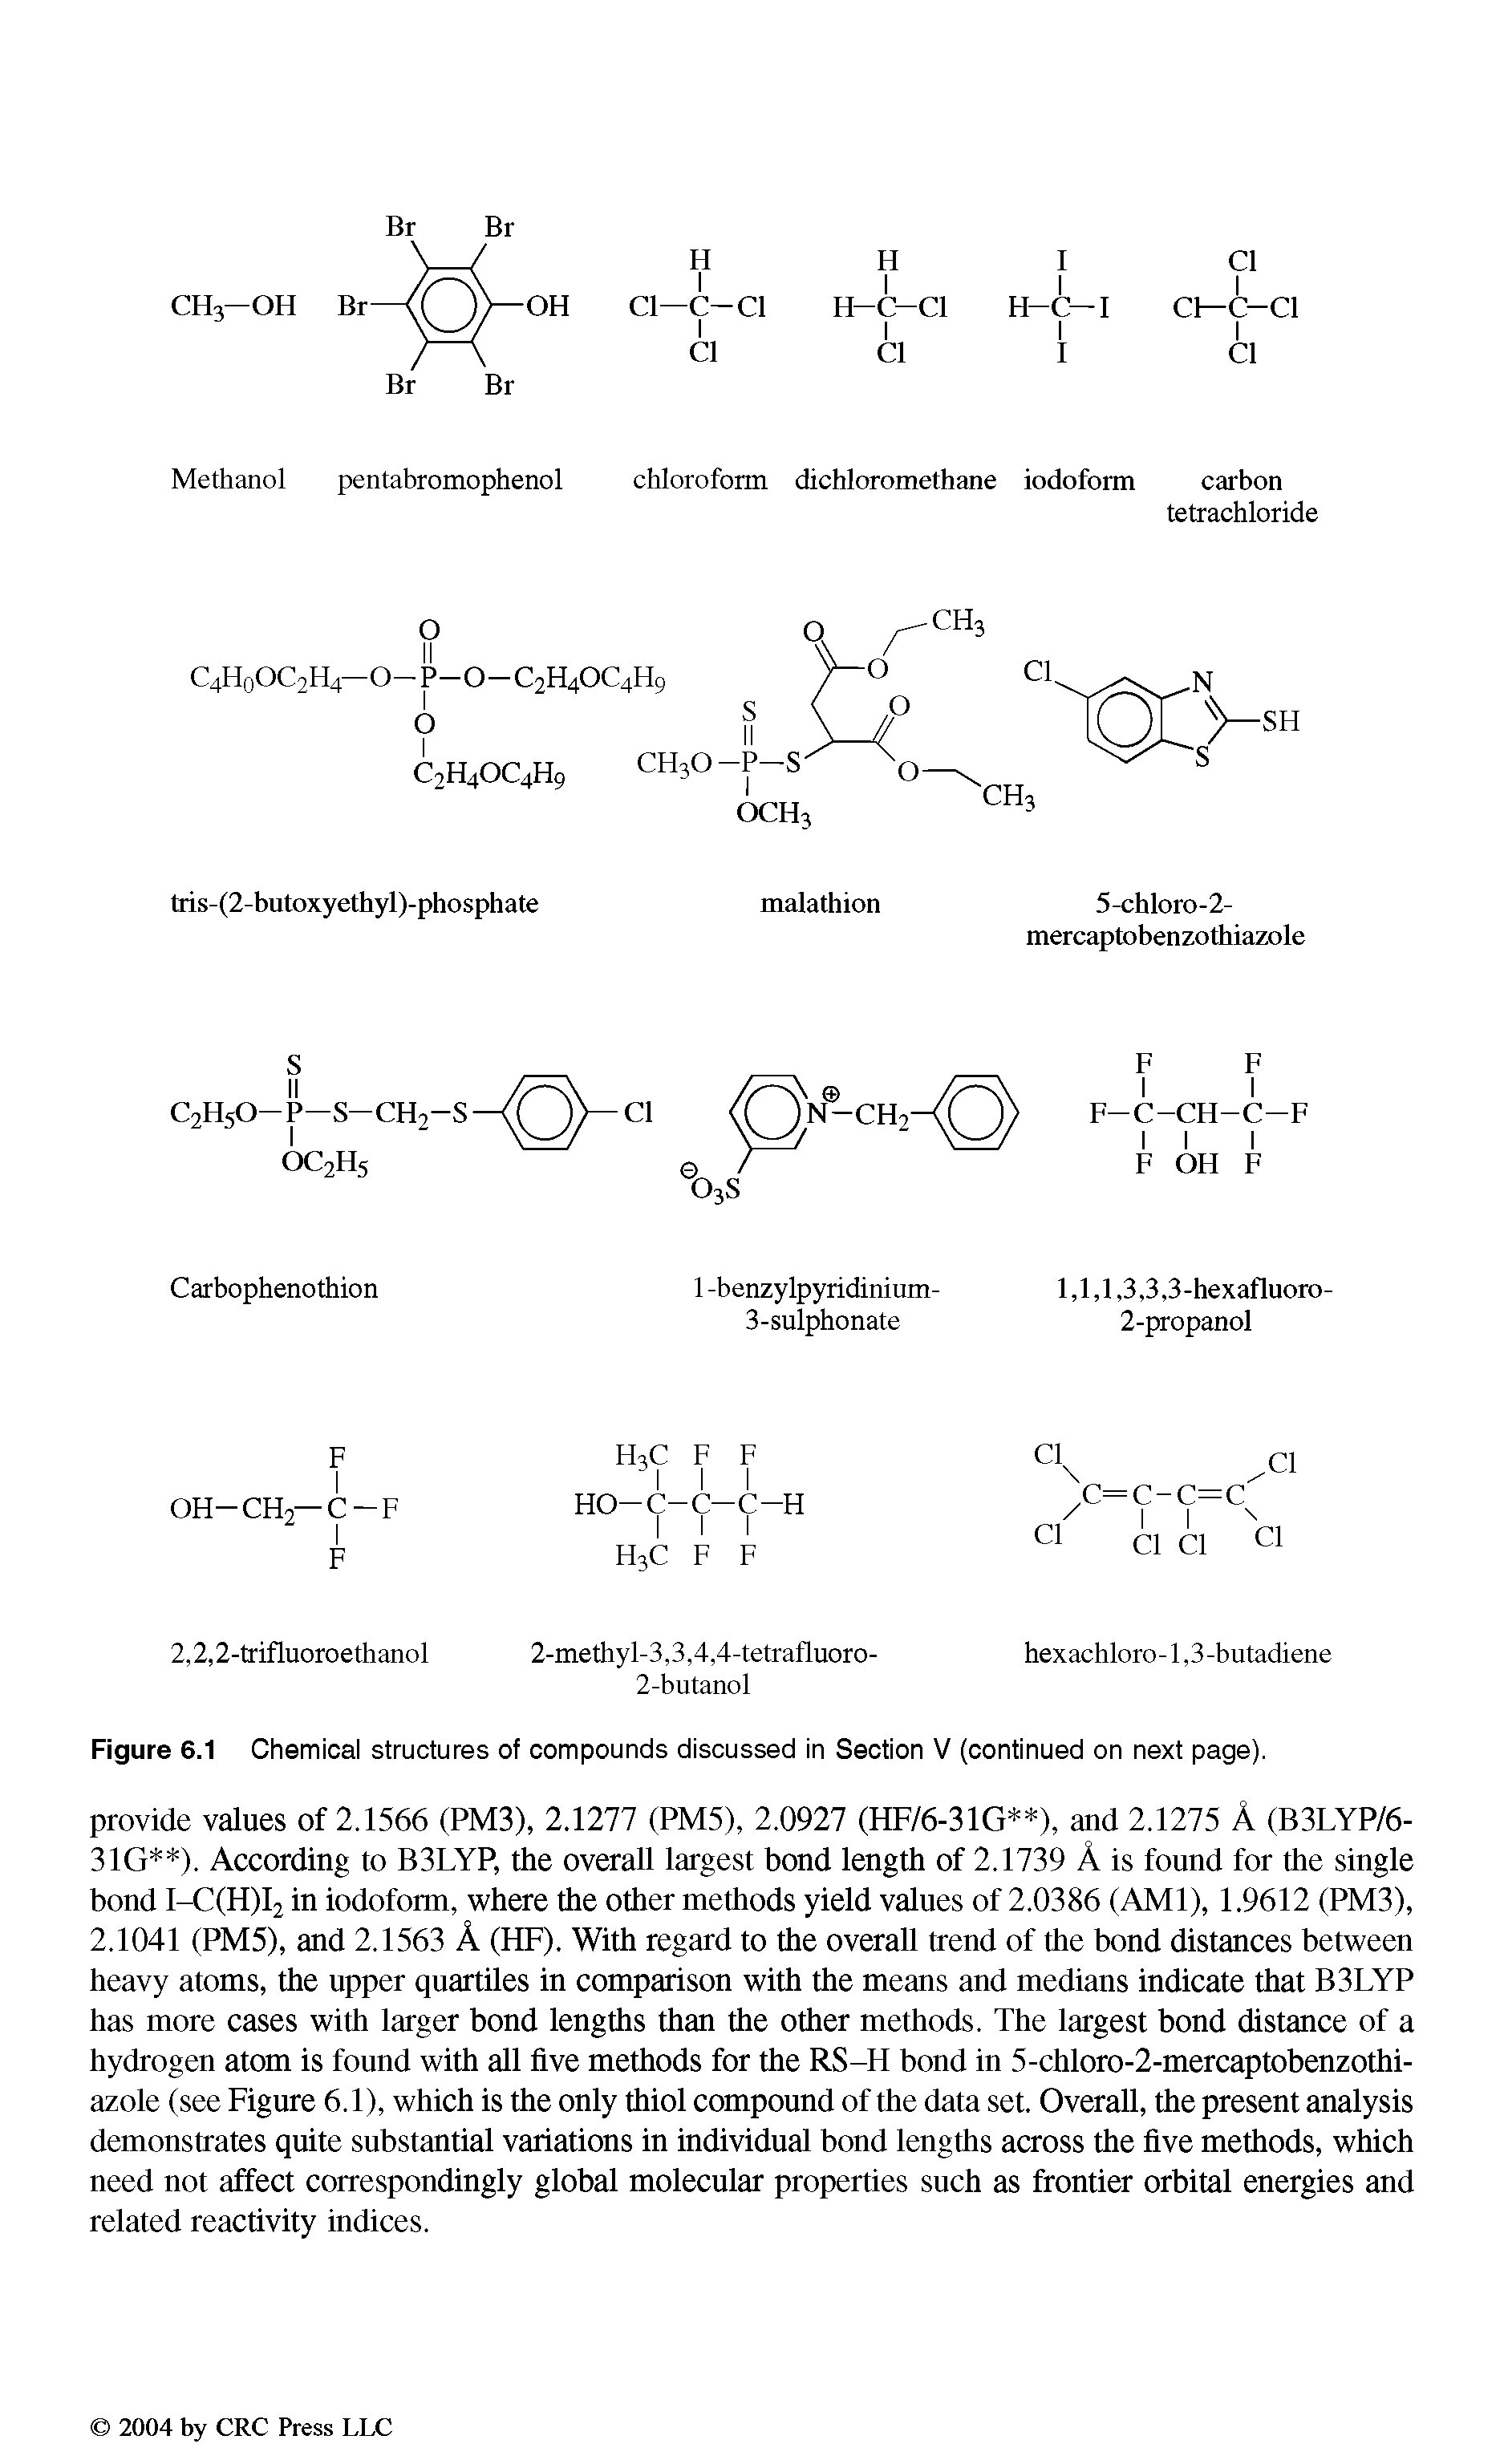 Figure 6.1 Chemical structures of compounds discussed in Section V (continued on next page).